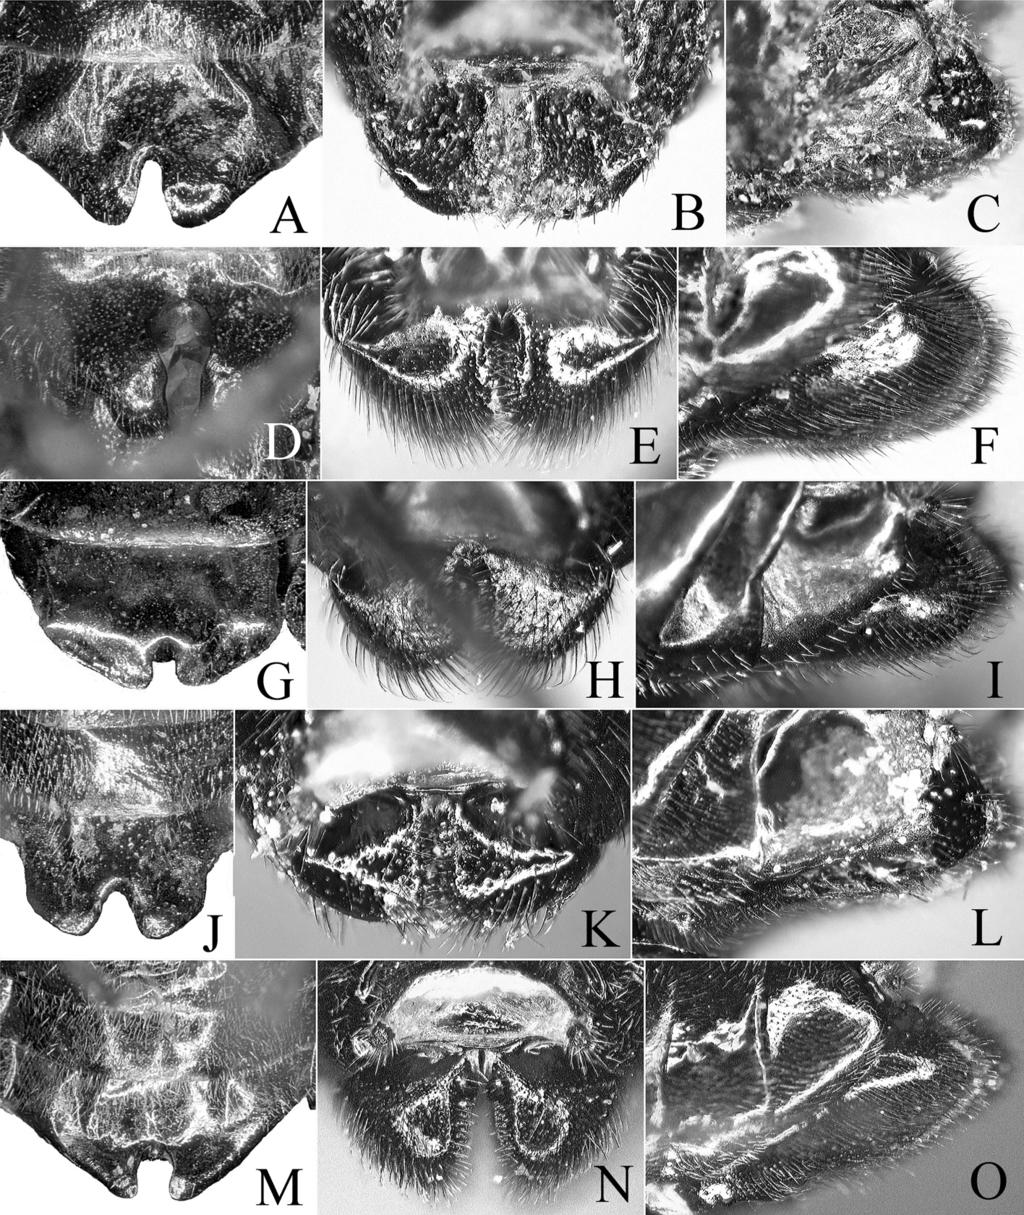 138 Akihiko Shinohara, Meicai Wei and Hideho Hara Fig. 6. Hypopygia, ventral view (A, D, G, J, M) and sawsheaths, dorsal (B, E, H, K, N) and lateral (C, F, I, L, O) view.